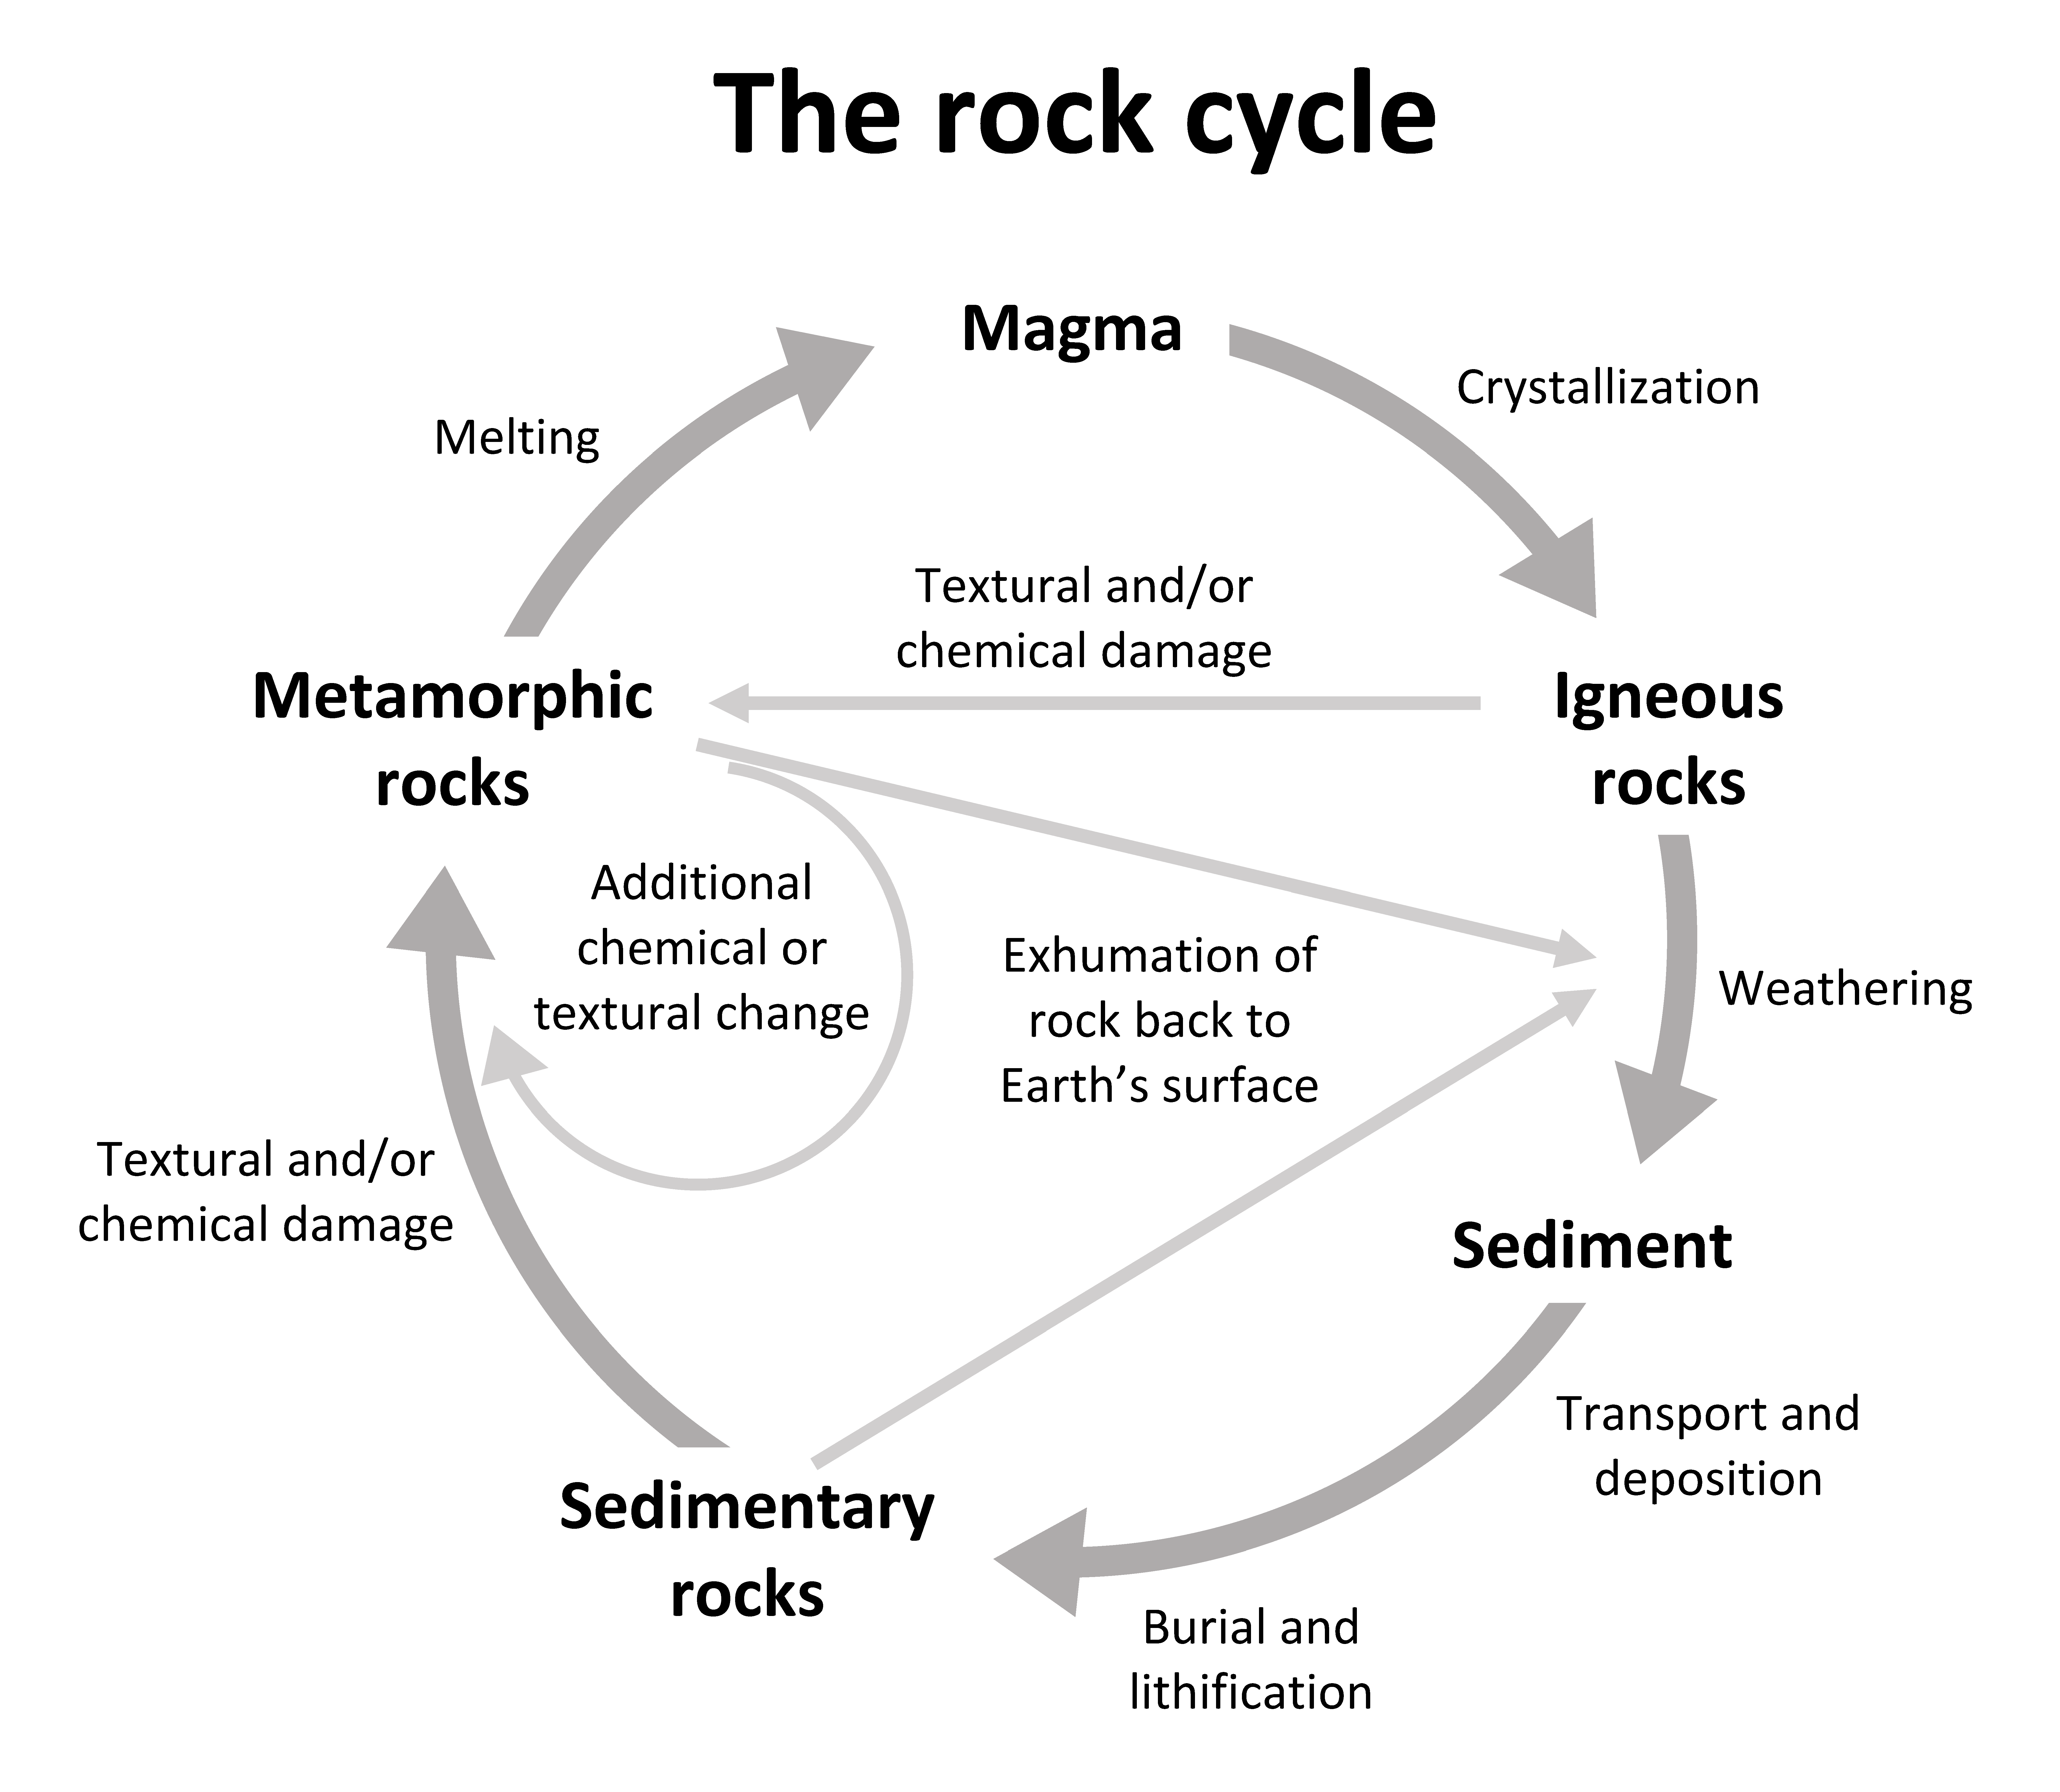 The rock cycle (clockwise). Magma turns to Igneous rock through crystallization. Igneous rocks turn to sediment through weathering. Sediment turns to sedimentary rocks through transport and deposition and burial and lithification. Sedimentary rocks turn to metamorphic rocks through textural and or chemical damage. Metamorphic rocks turn to magma through melting. Igneous rocks turn to metamorphic rocks through textural and/or chemical damage. metamorphic and sedimentary rocks endure weathering by exhumation of rock back to Earth's surface.